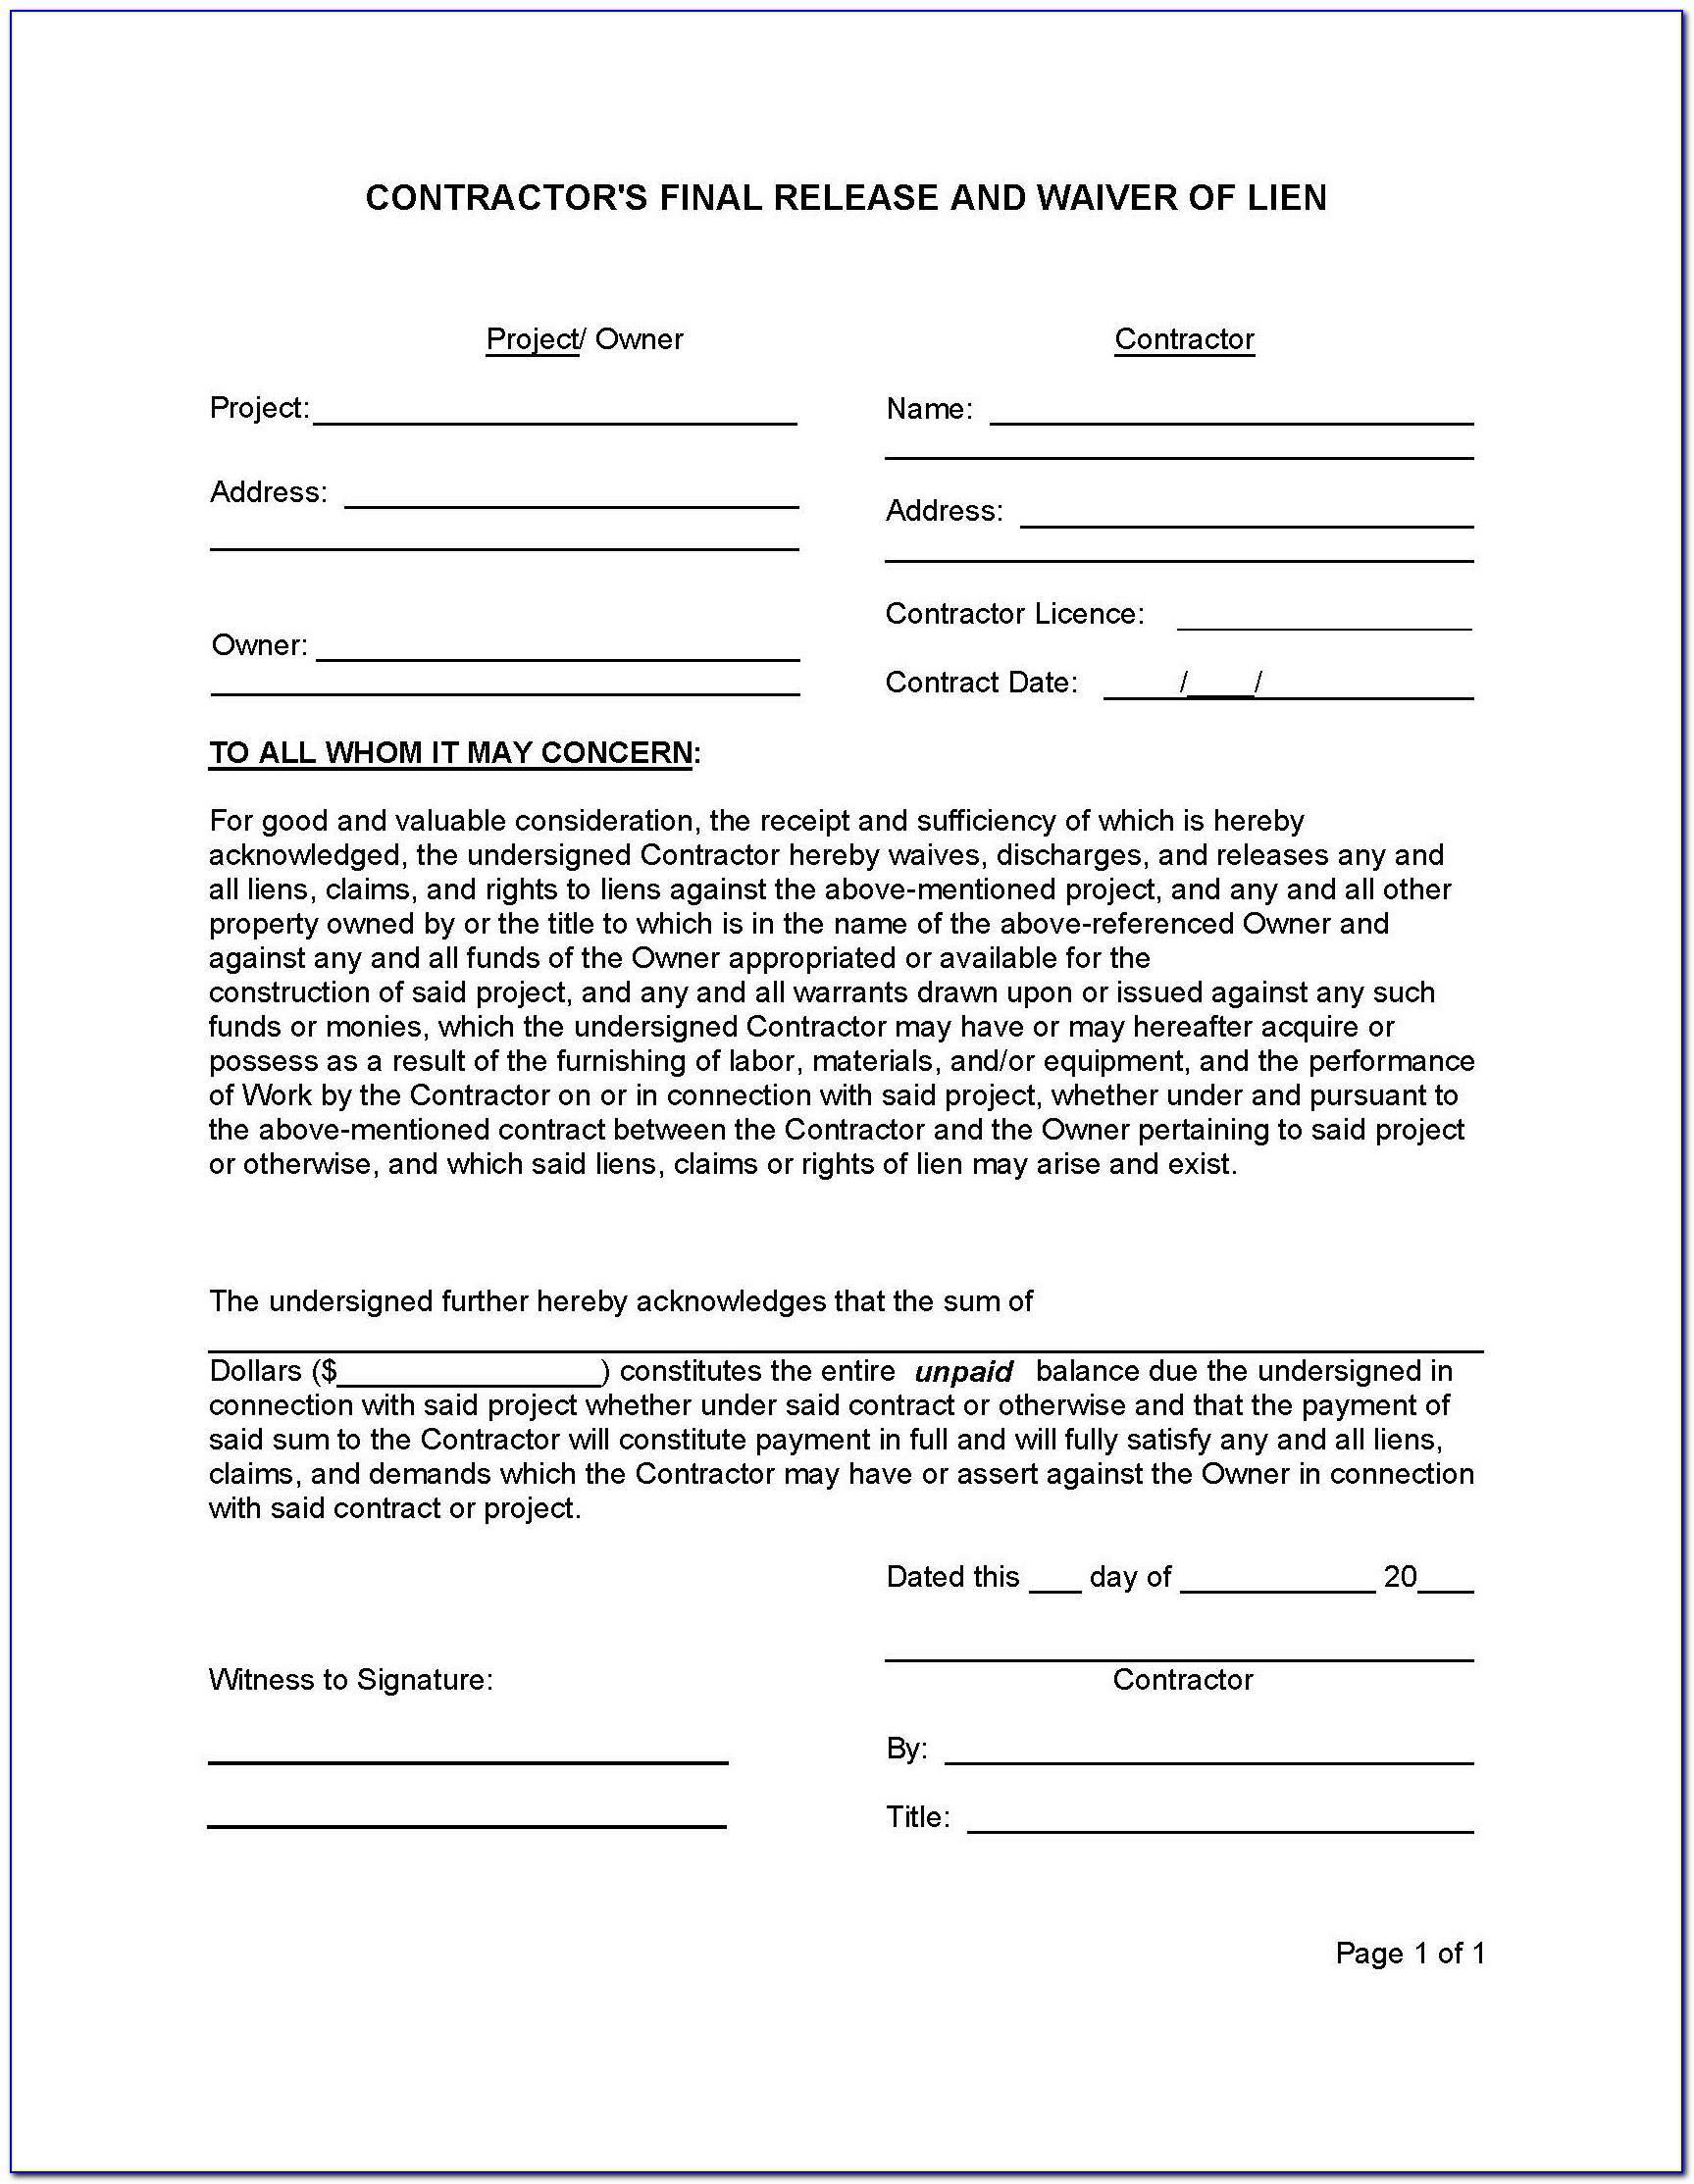 Lien Waiver Form Example